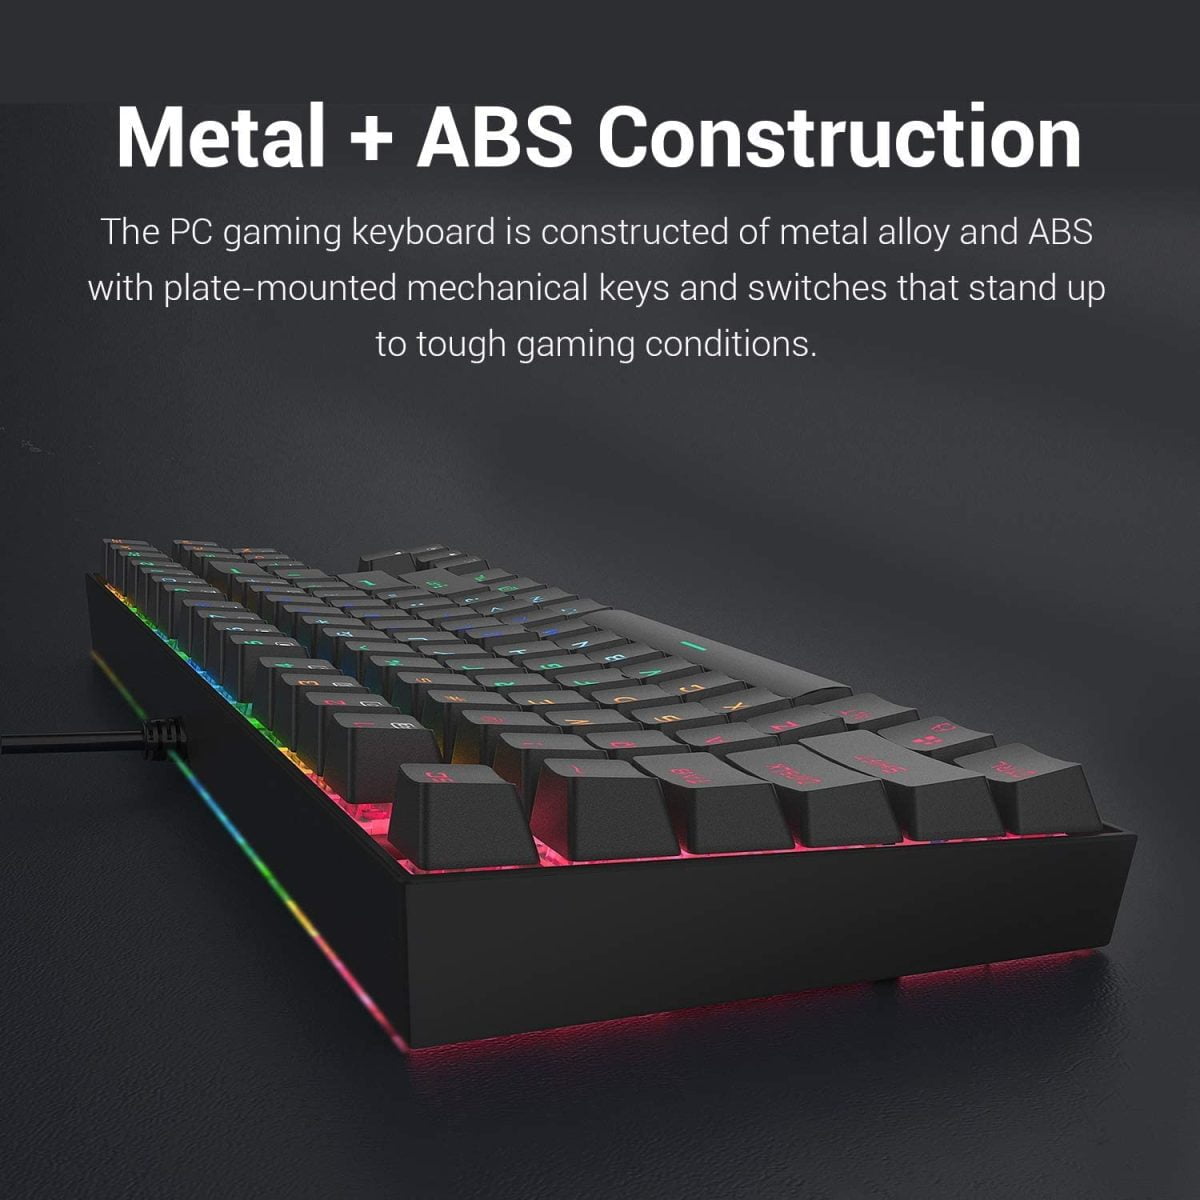 71Wygiaqb3L. Ac Sl1500 Redragon &Lt;H1 Id=&Quot;Title&Quot; Class=&Quot;A-Size-Large A-Spacing-None&Quot;&Gt;Redragon K552-Rgb Kumara Rgb Led Backlit Mechanical Gaming Keyboard (Black)&Lt;/H1&Gt; &Lt;Span Class=&Quot;A-List-Item&Quot;&Gt;Ergonomic Designed Steel Series Mechanical Game Keyboards High-Quality Durable Metal-Abs Construction With Plate-Mounted Mechanical Keys And Switches That Stand Up Even During The Most Testing Marathon Gaming Sessions. &Lt;/Span&Gt;&Lt;Span Class=&Quot;A-List-Item&Quot;&Gt;Anti Ghosting All 87 Keys Are Conflict Free Nkey Rollover Featuring 12 Multimedia Keyboard Keys And A Non-Slip Ergonomic, Splash-Proof Design Comes With Gold-Plated High-Speed Corrosion Free Usb Connector For A Reliable Connection&Lt;/Span&Gt; Gaming Keyboard Redragon K552 Mechanical Gaming Keyboard